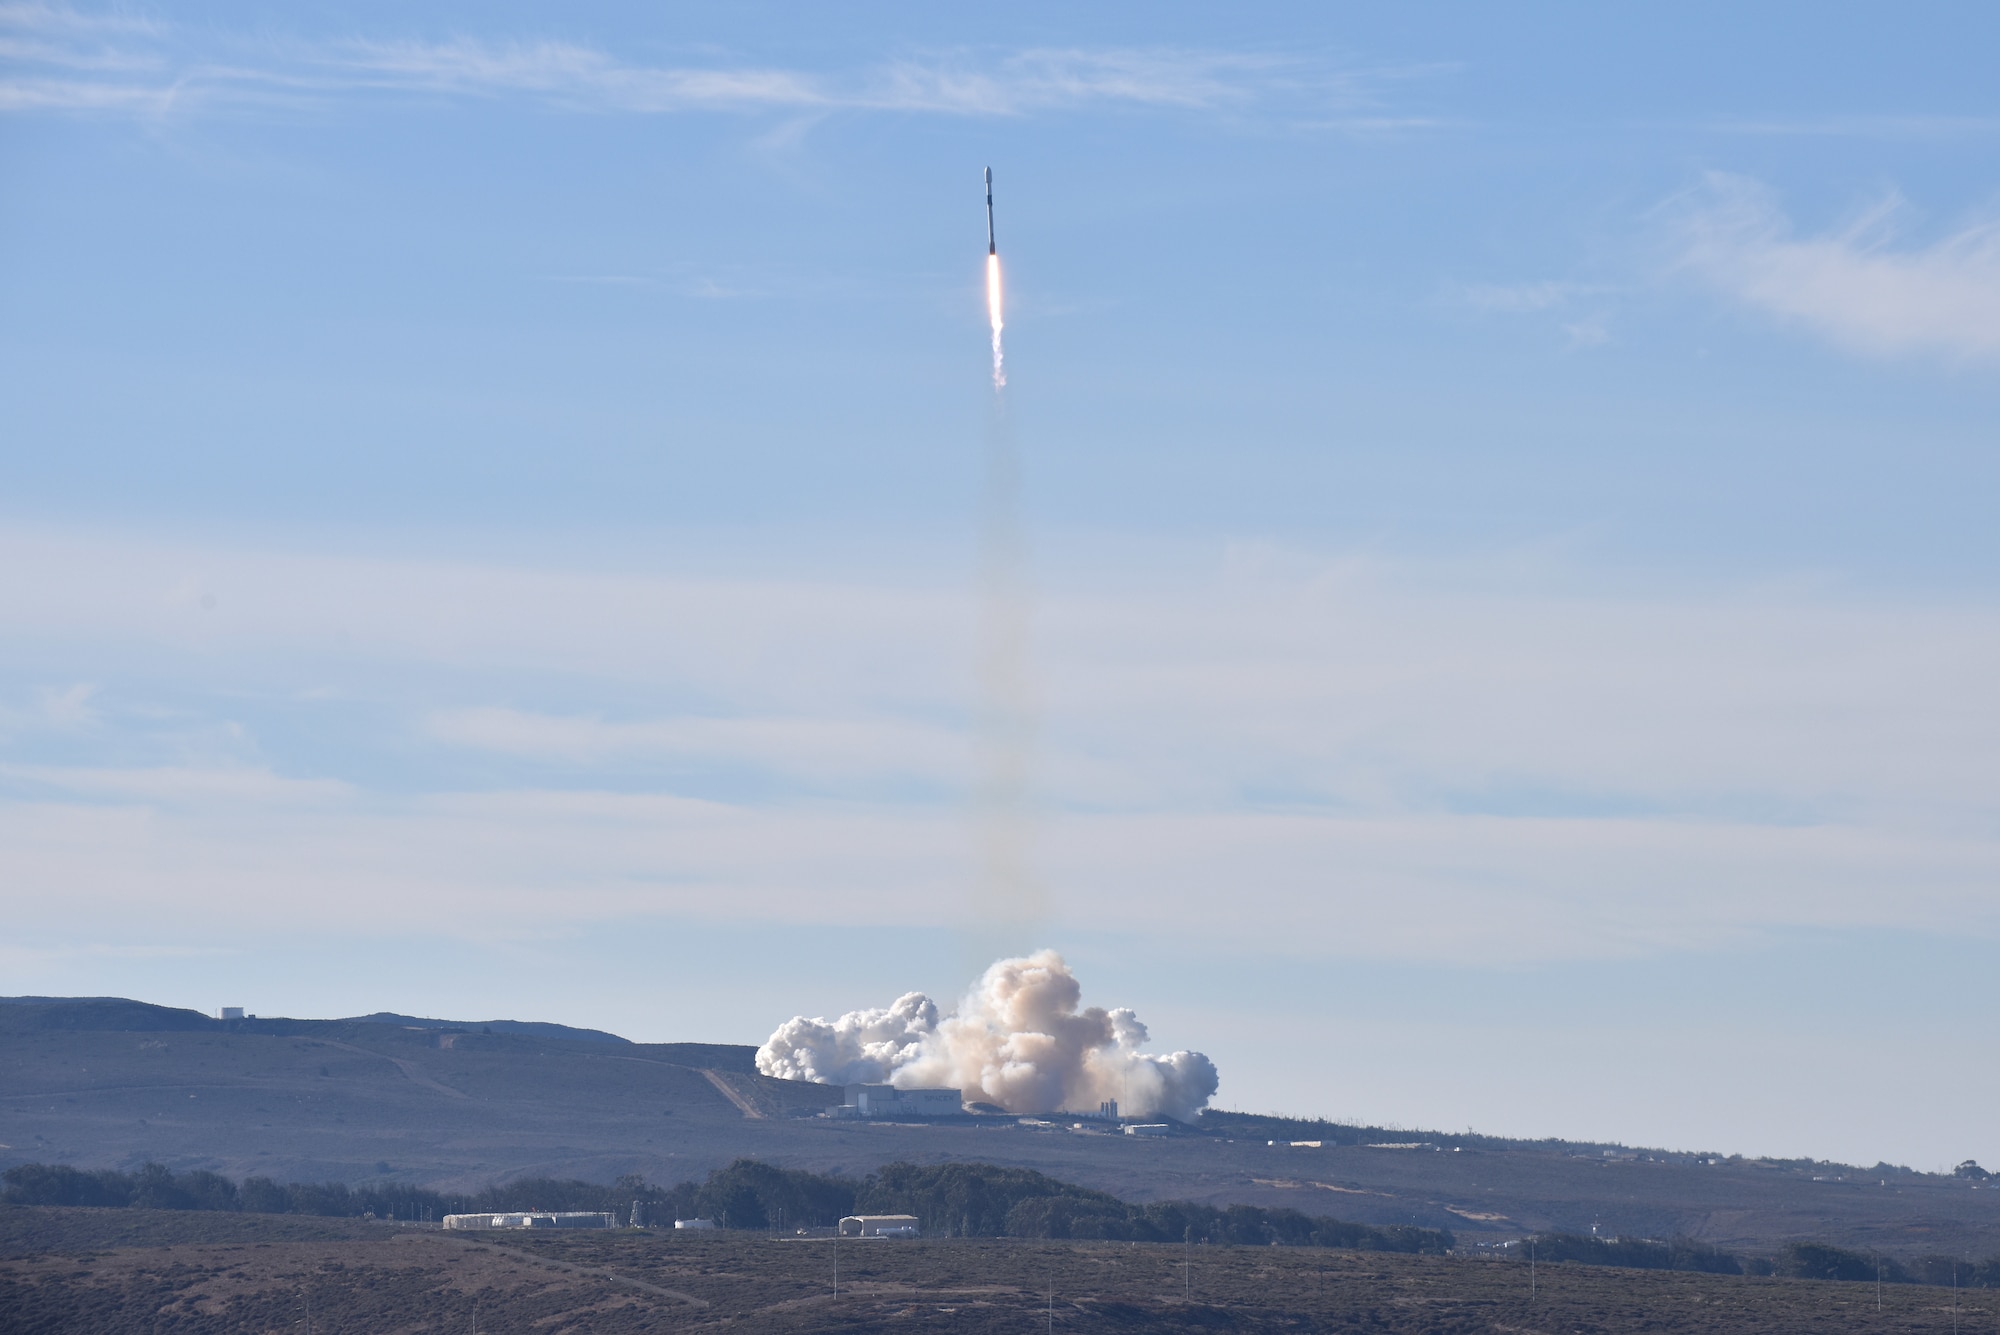 Members at Vandenberg Air Force Base launched the Sentinel-6 Michael Freilich satellite Saturday, Nov. 21, 2020, at 9:17 a.m., from Vandenberg Air Force Base, Calif. The Sentinel-6 is the first of two identical satellites to head into Earth orbit five years apart to continue sea level observations for at least the next decade.